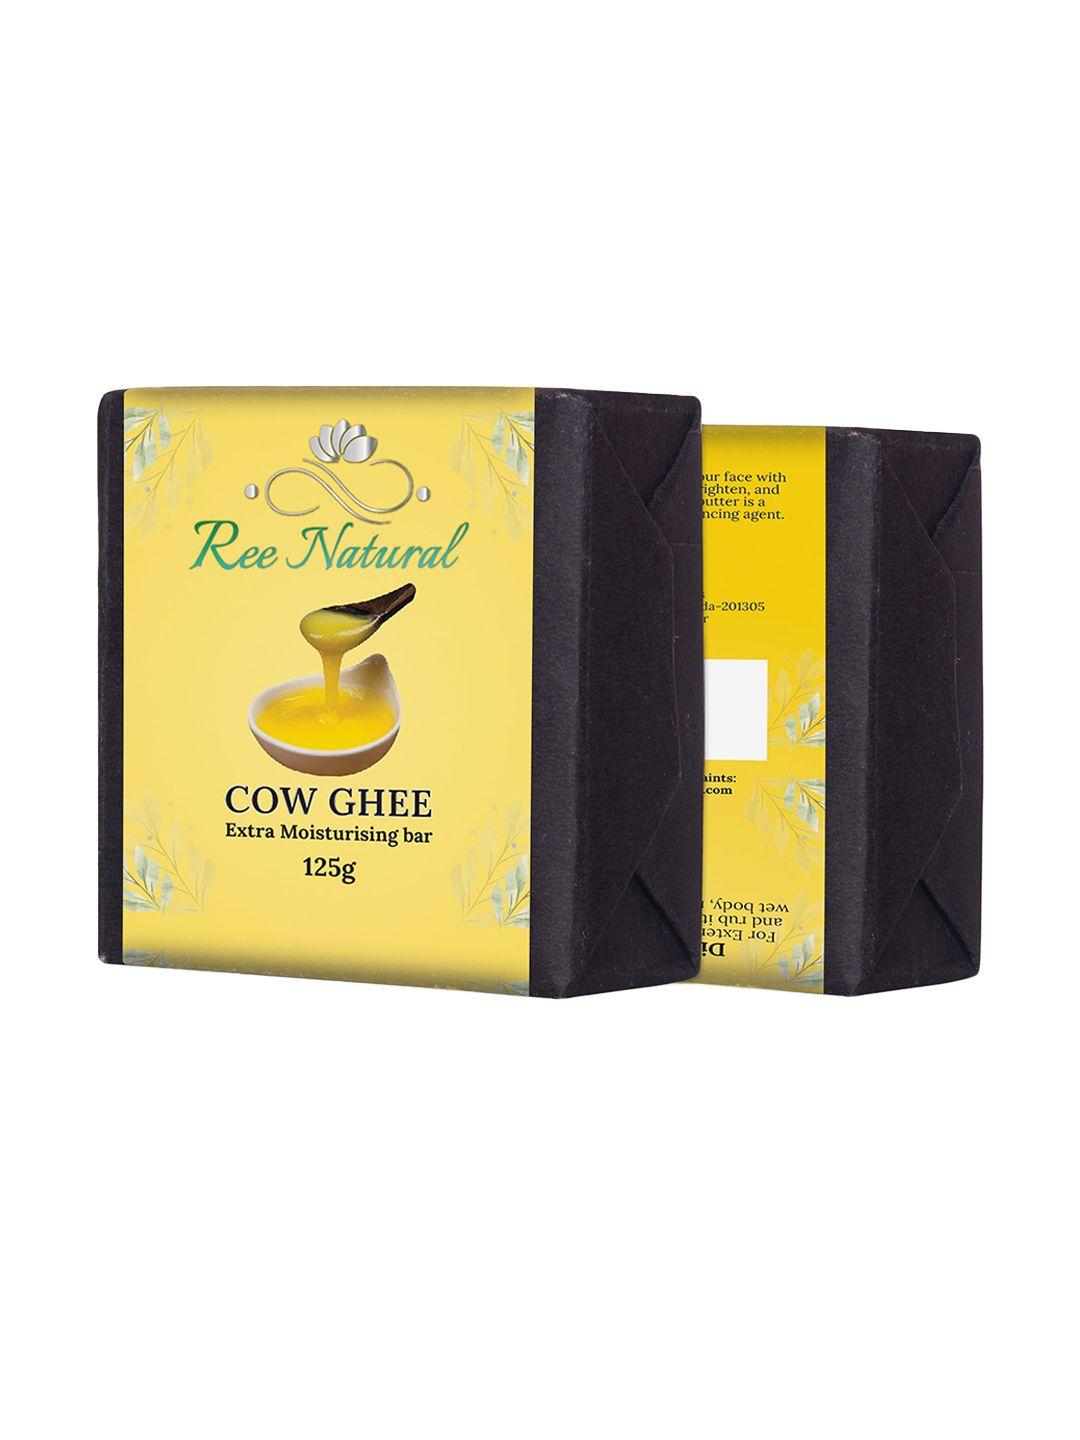 Ree Natural Cold Processed Cow Ghee Extra Moisturising Bar - 125g